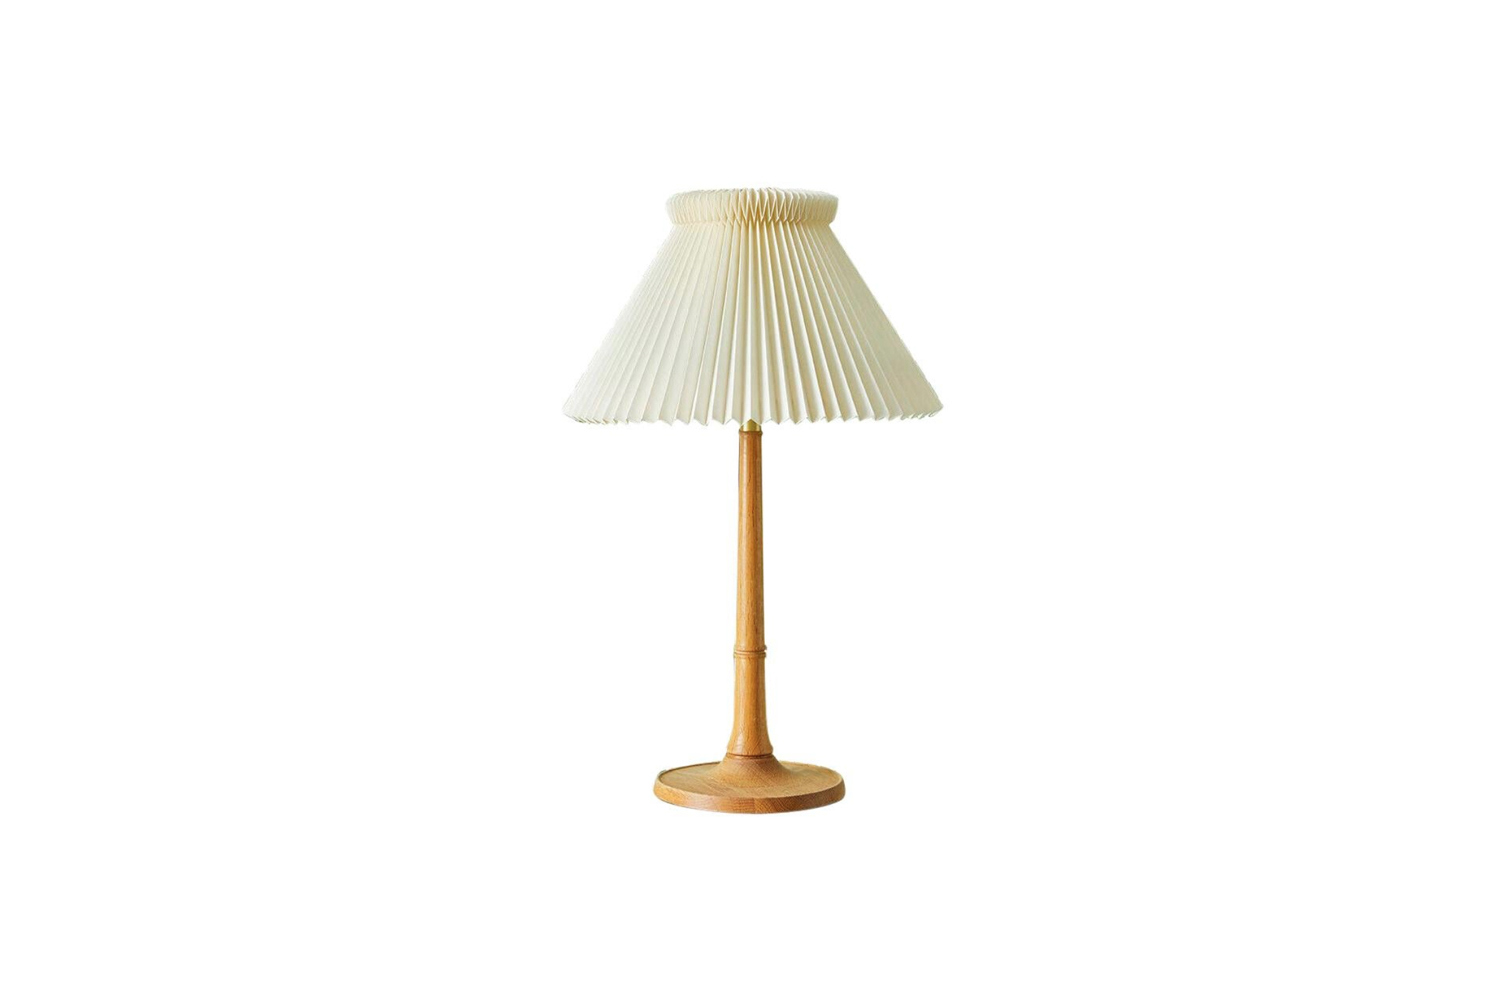 on the table is the vintage le klint oak table lamp, available for  alt=